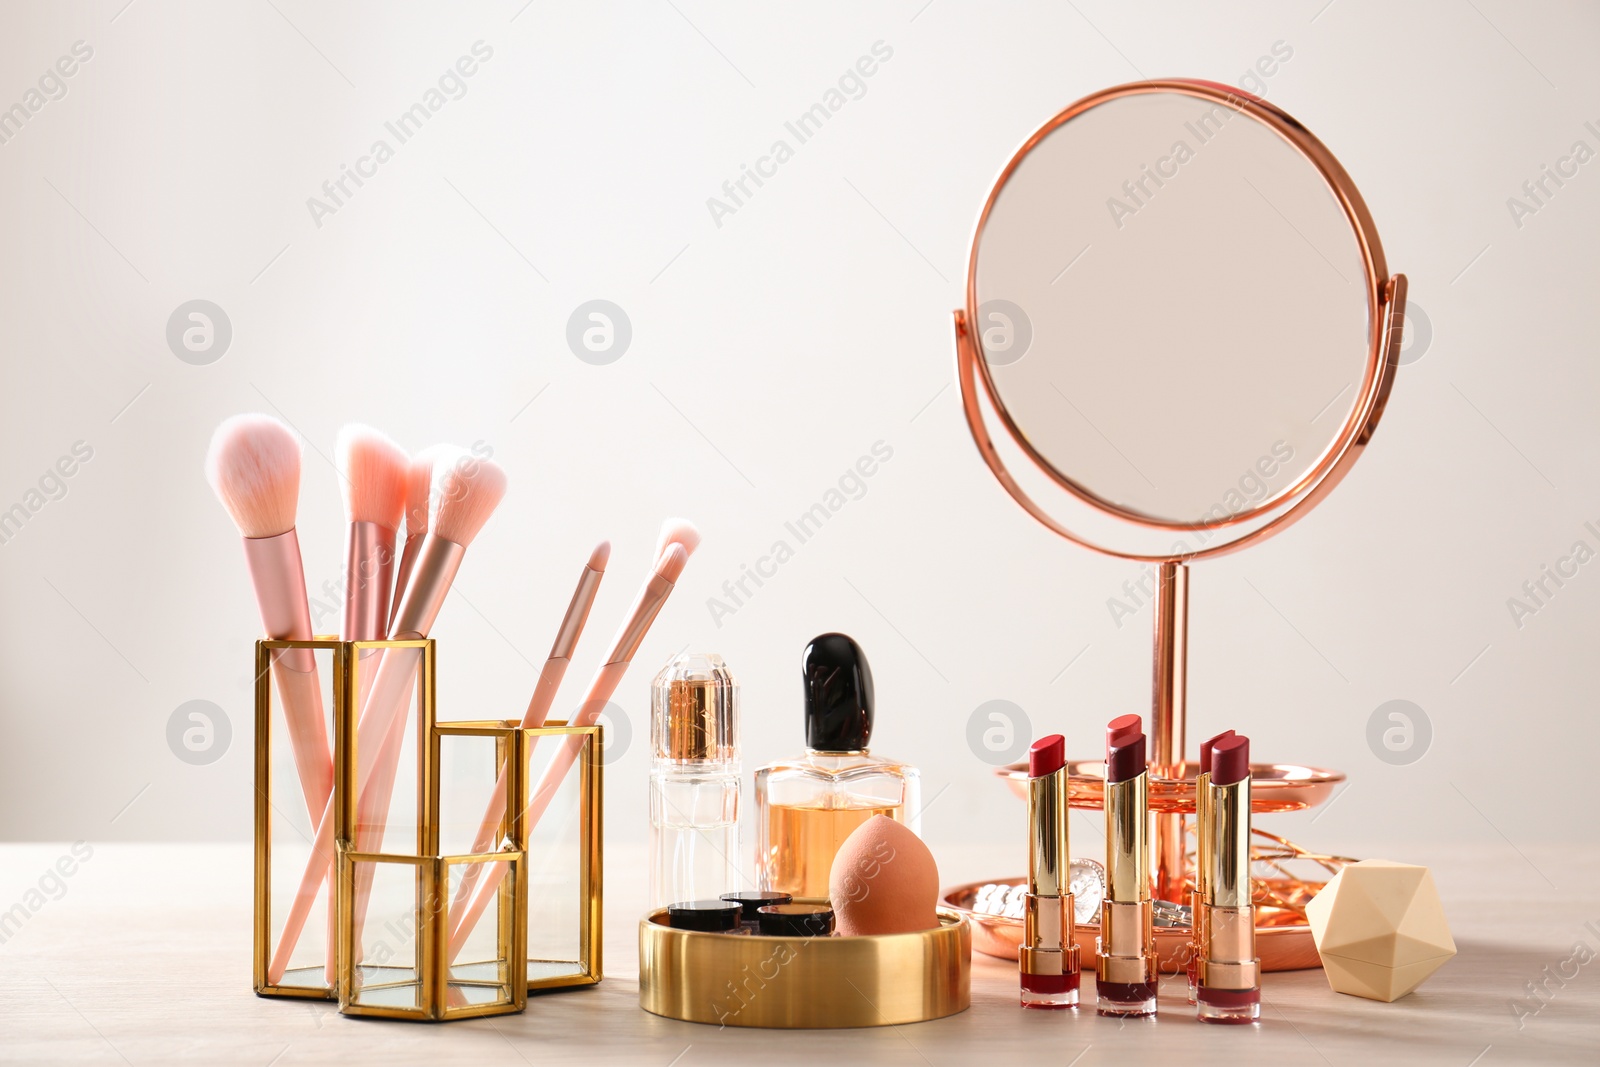 Photo of Set of makeup products and brushes on table